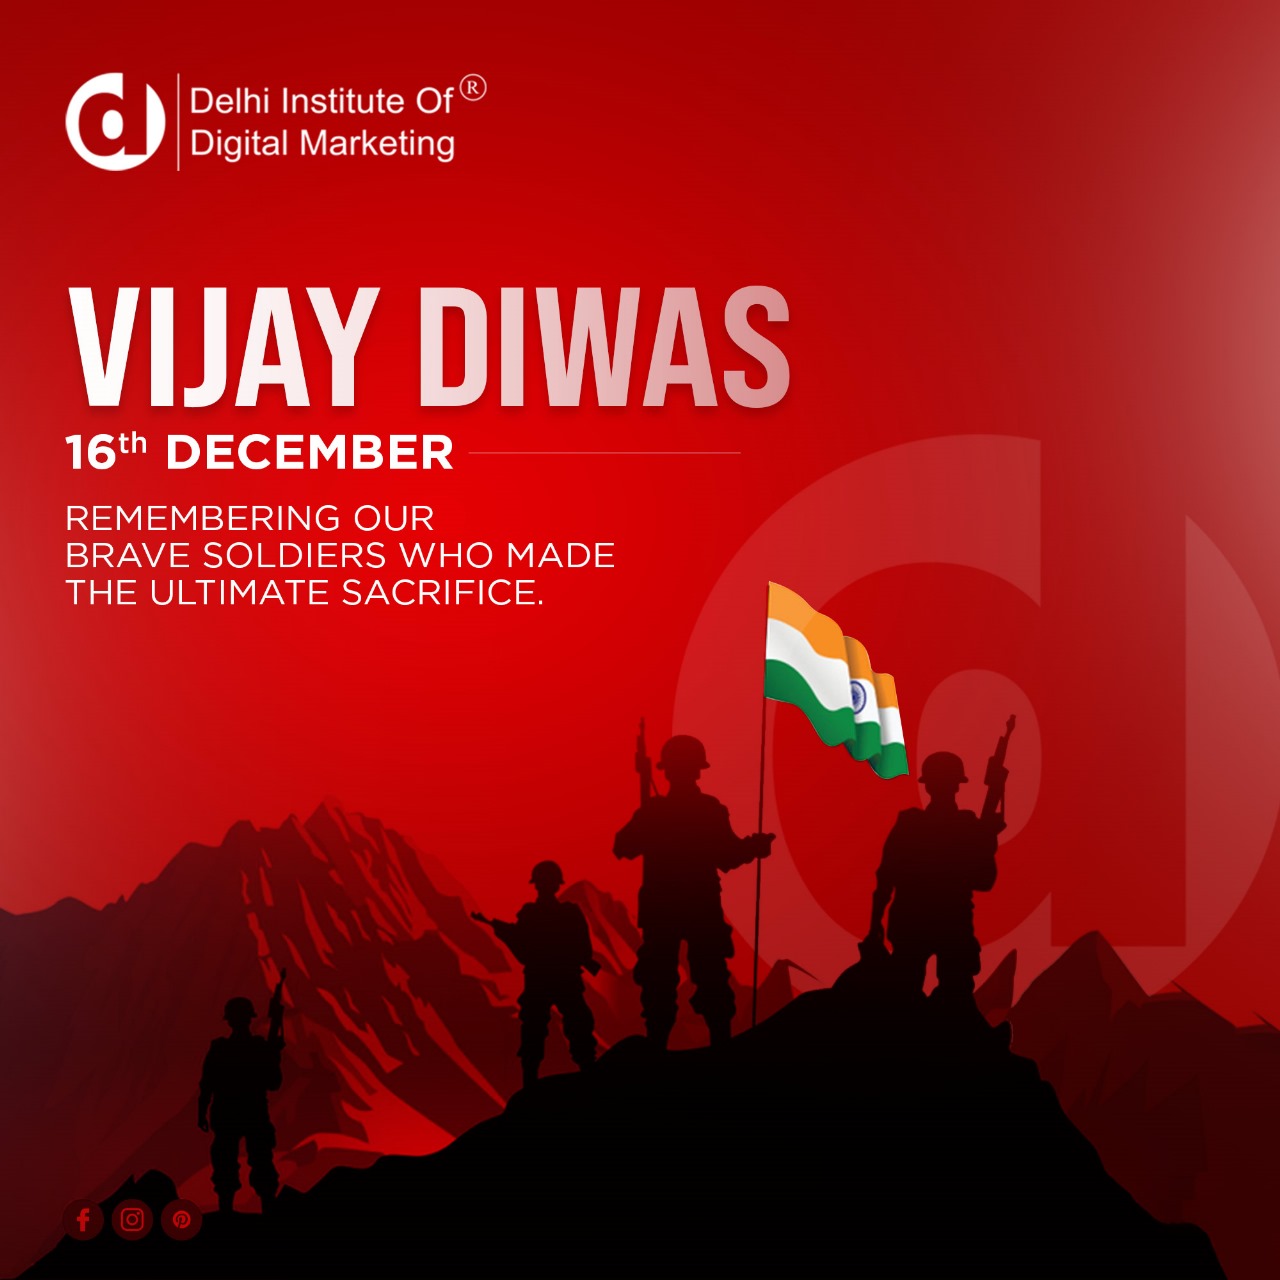 Vijay Diwas, A Day to Salute the Brave